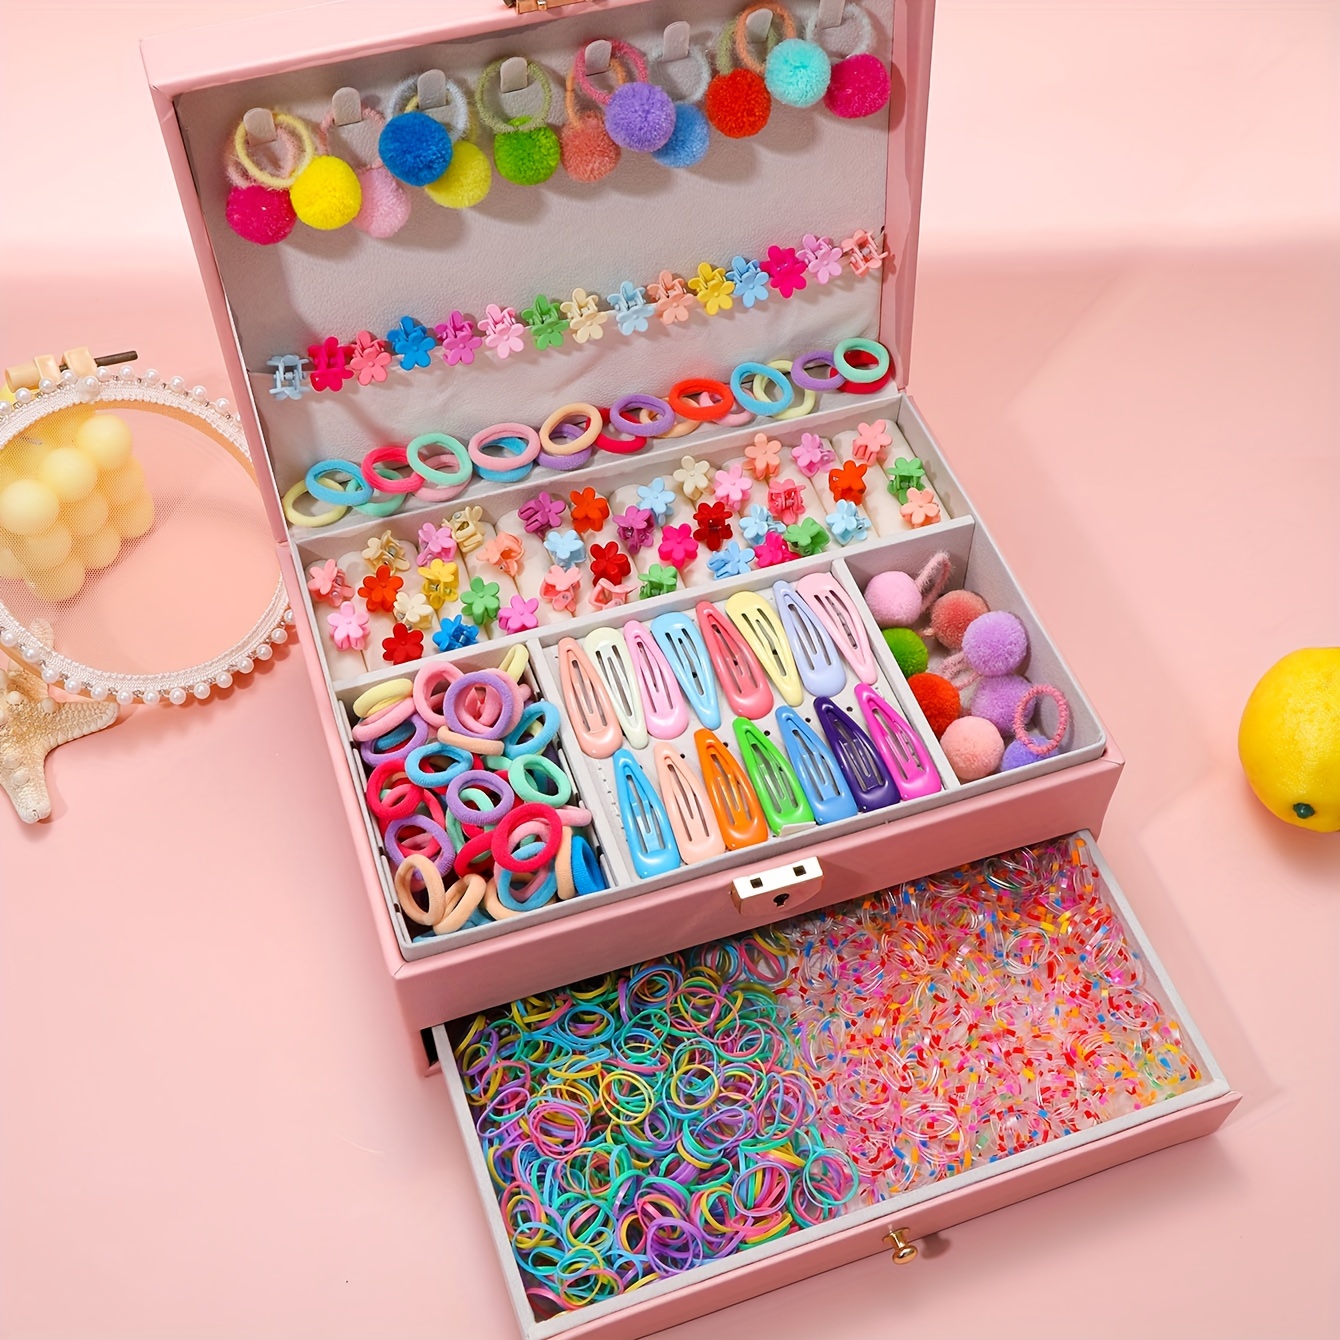 

Chic 1201-piece Hair Styling Set: Colorful Elastic Bands & Flower Clips - Perfect For All Seasons